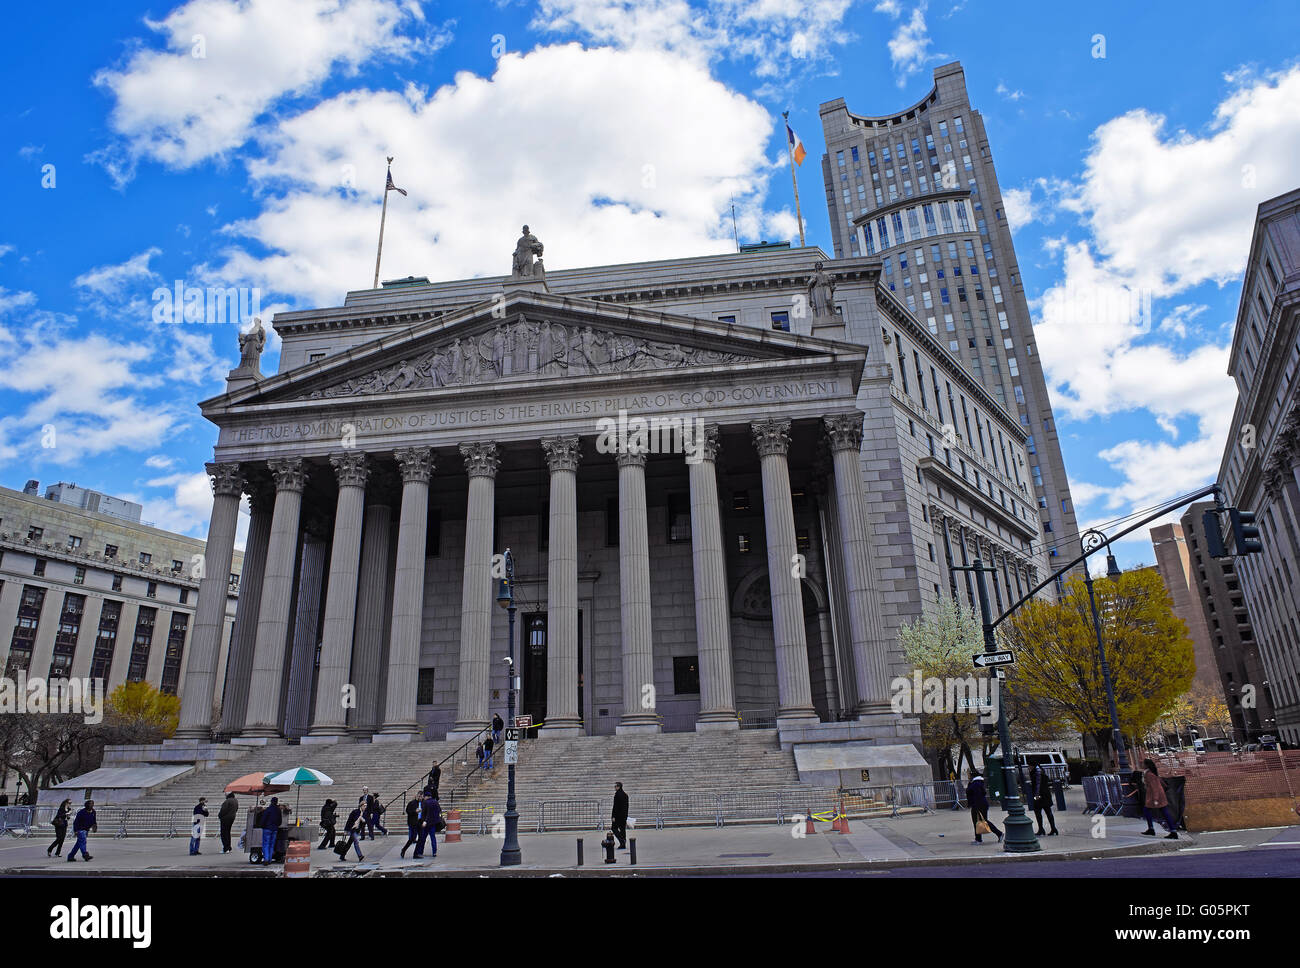 NEW YORK, USA - 24. April 2016: Streetview in New York State Supreme Building oder New York County Courthouse Stockfoto